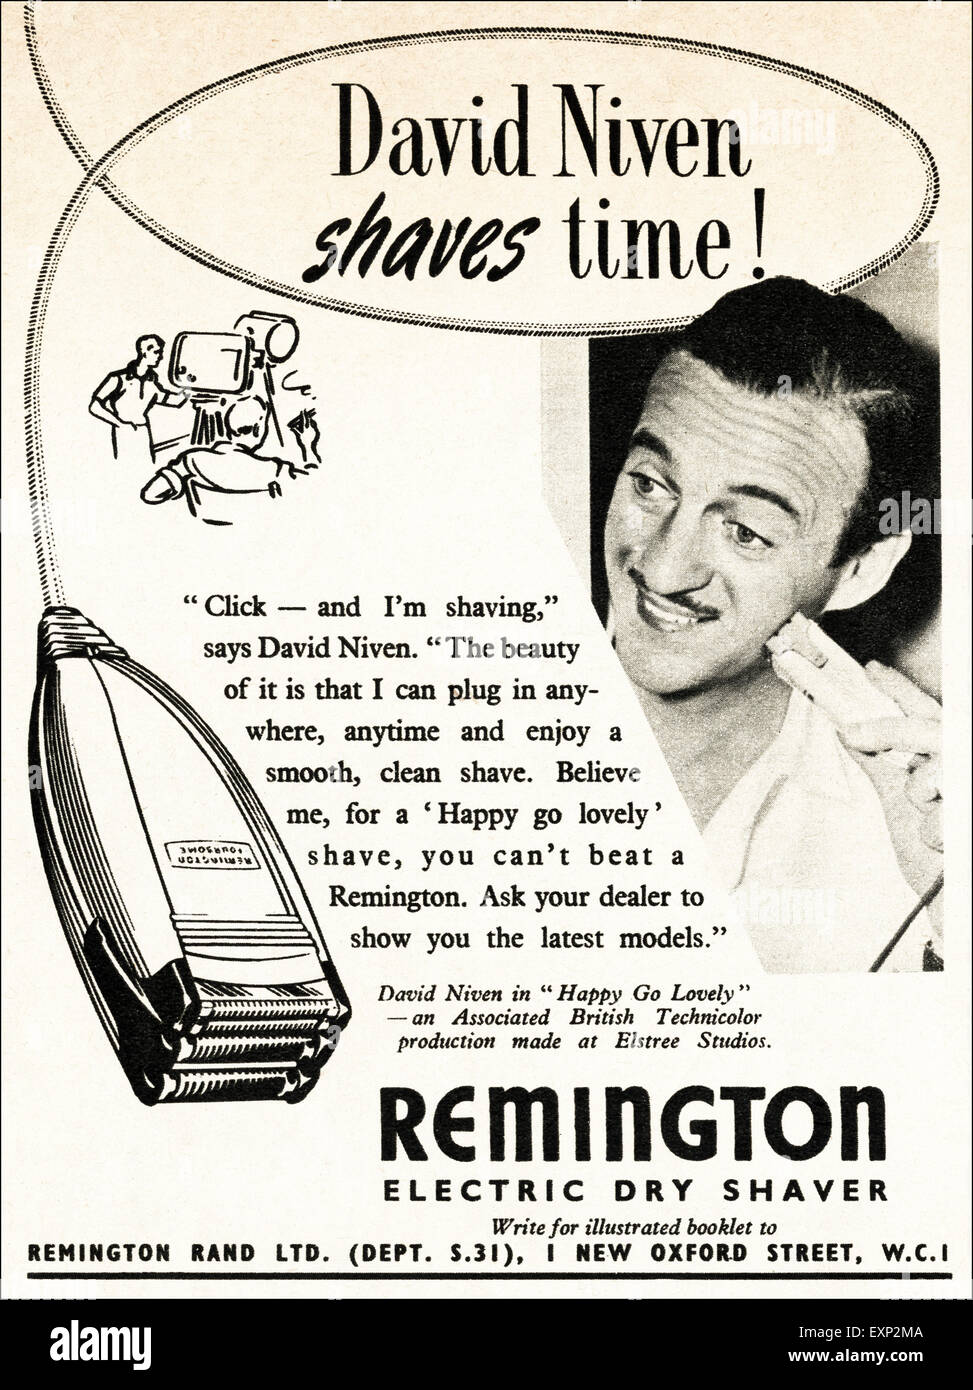 photography Remington - hi-res Alamy and stock shaver images